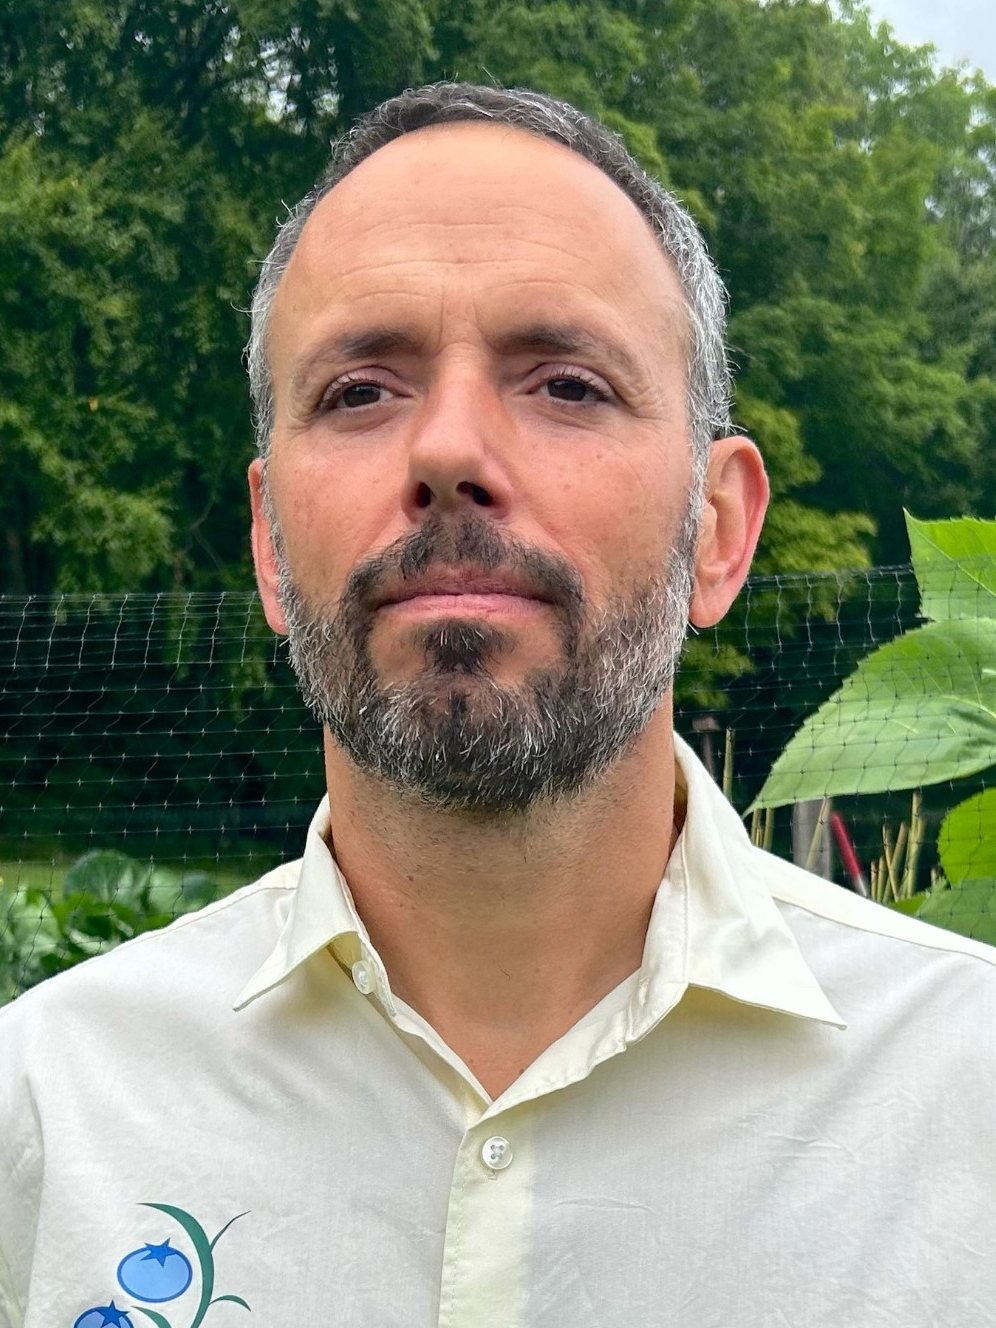 Nicholas is wearing a white button down shirt and is photographed outside in front of various greenery. Nicholas has short grey hair and dark grey facial hair.